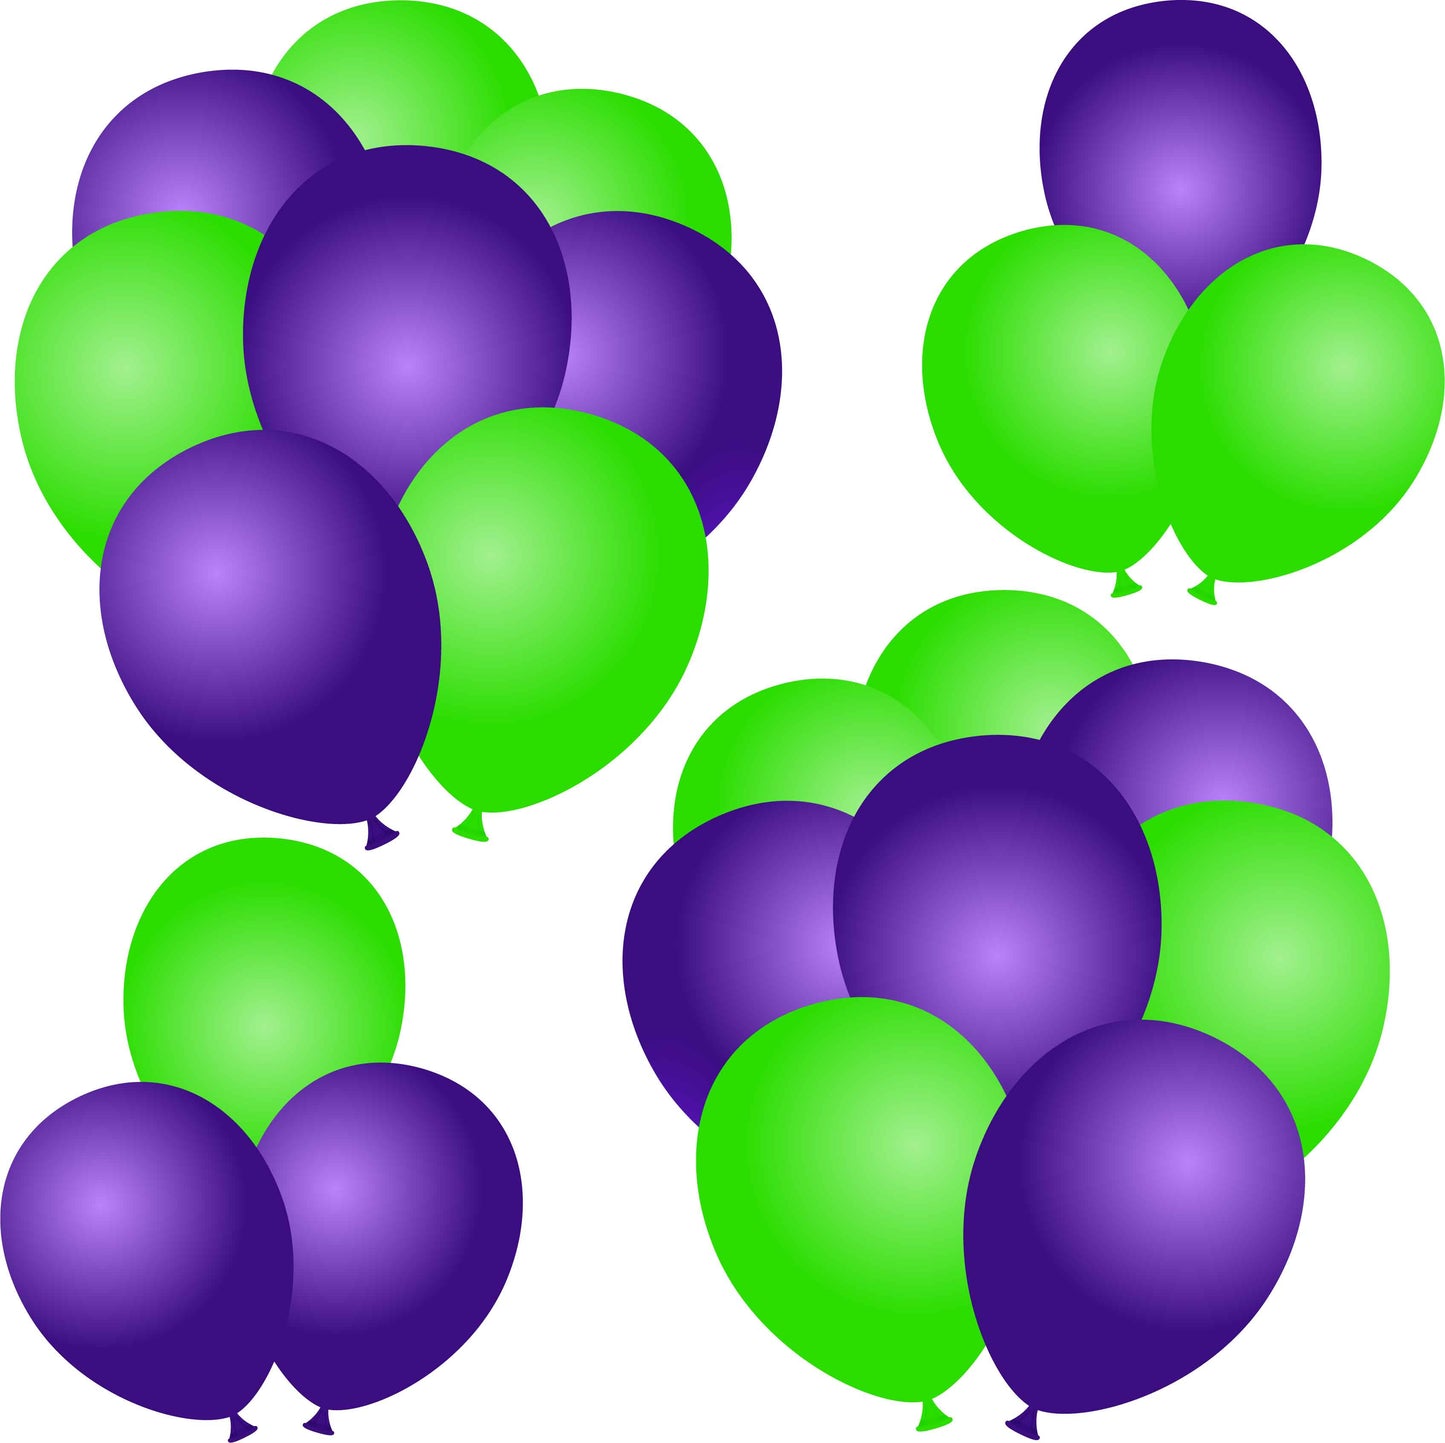 Solid Neon Green and Light Purple Balloons Half Sheet Misc.